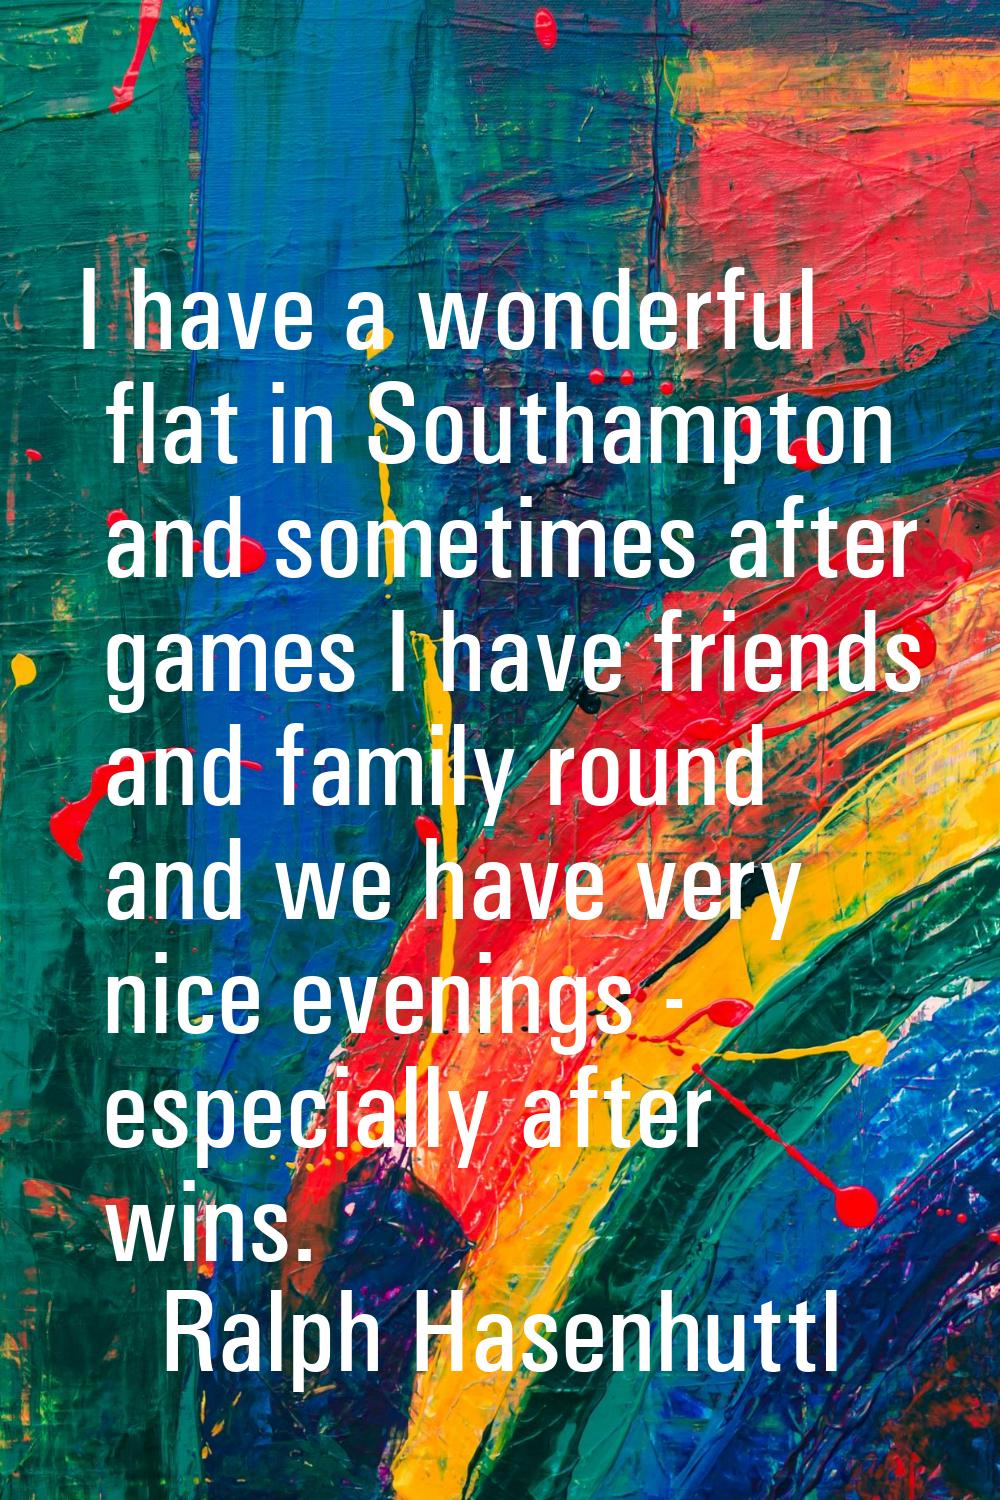 I have a wonderful flat in Southampton and sometimes after games I have friends and family round an